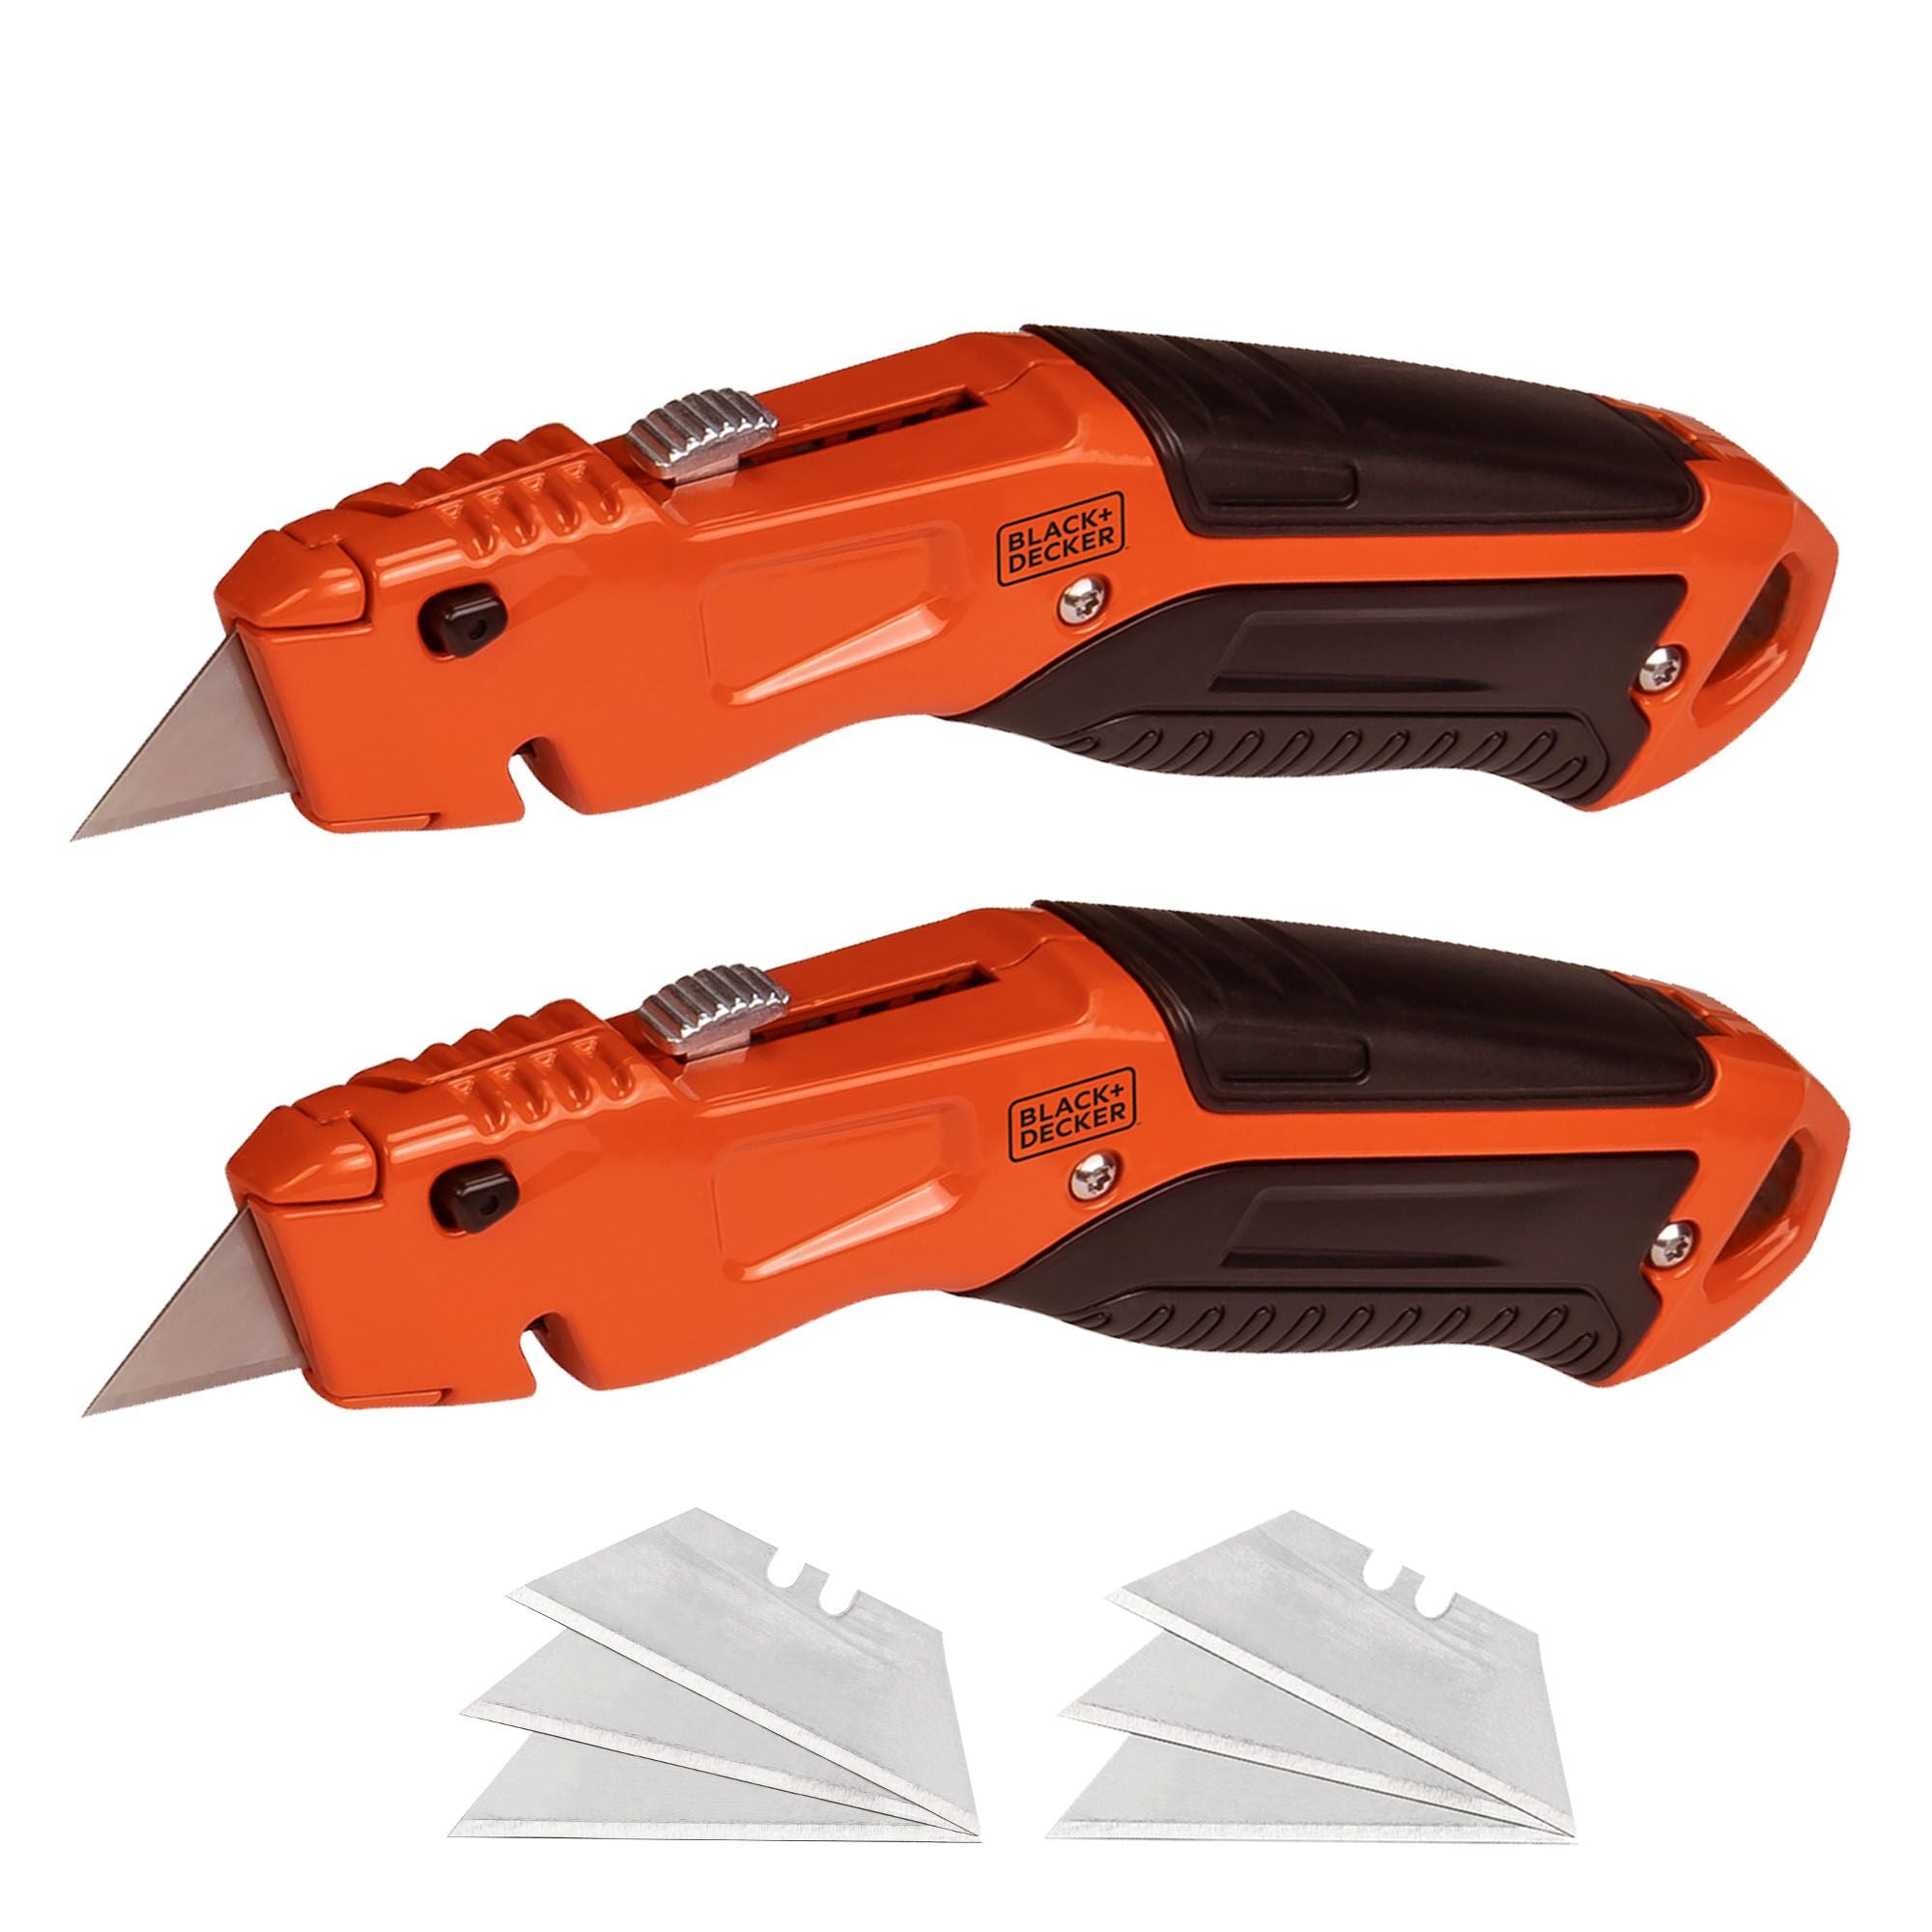 View of BLACK+DECKER Retractable Utility Knife with blades on white background